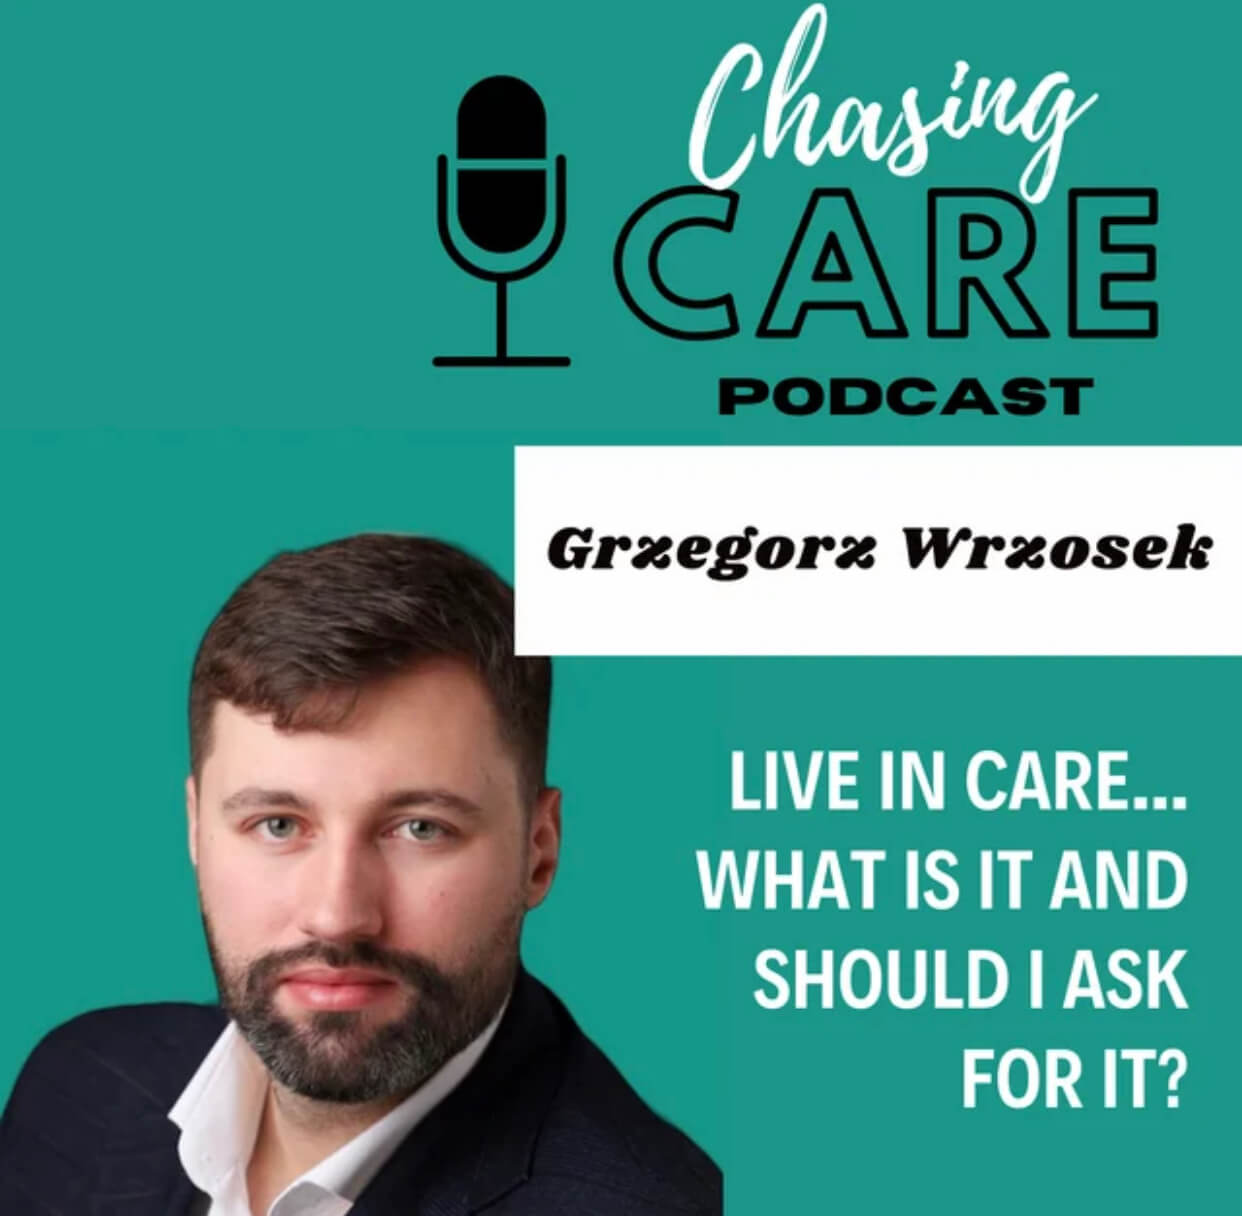 Live in Care - what is it and should I ask for it? Chasing Care podcast